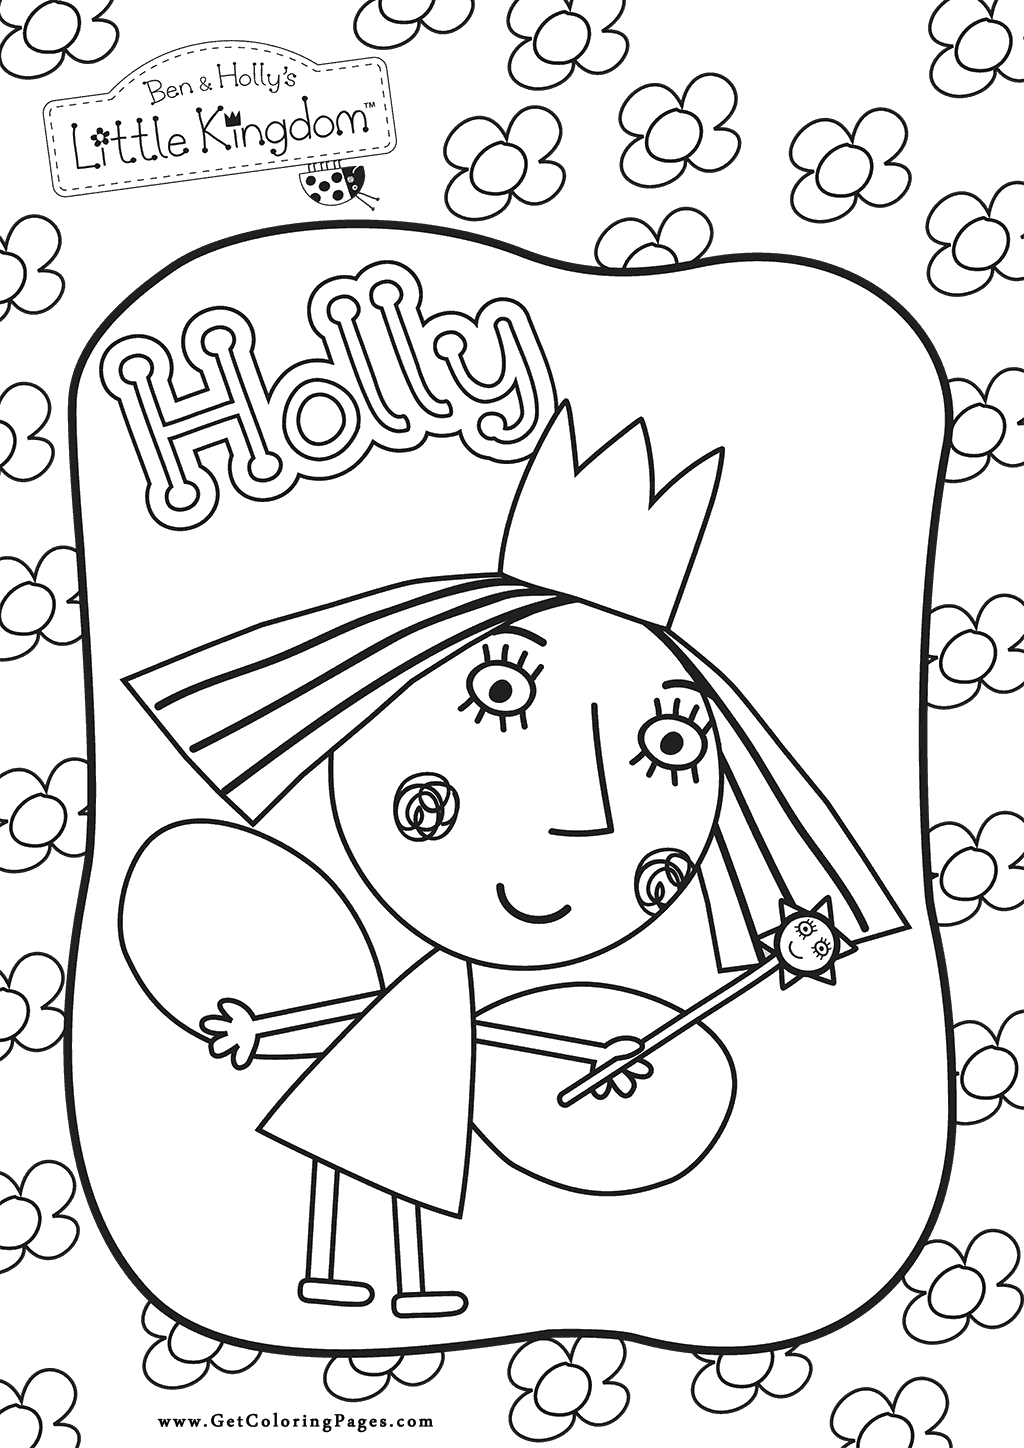 Ben And Holly Coloring Pages - GetColoringPages.com